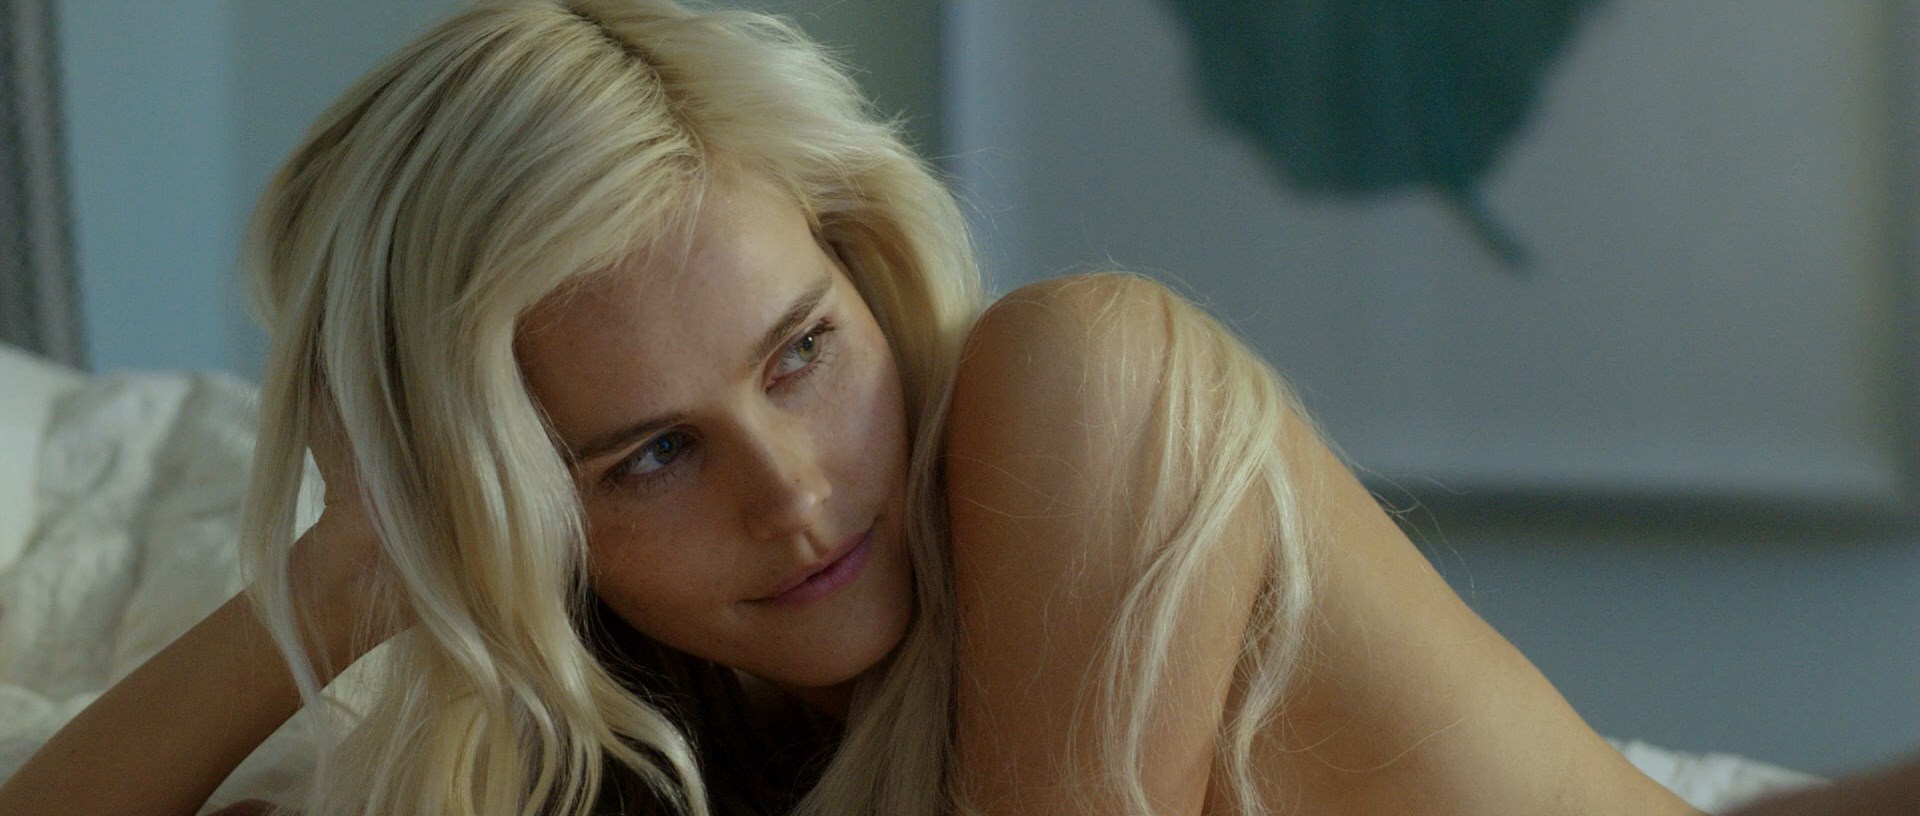 Isabel Lucas - Careful What You Wish For - 1080p.